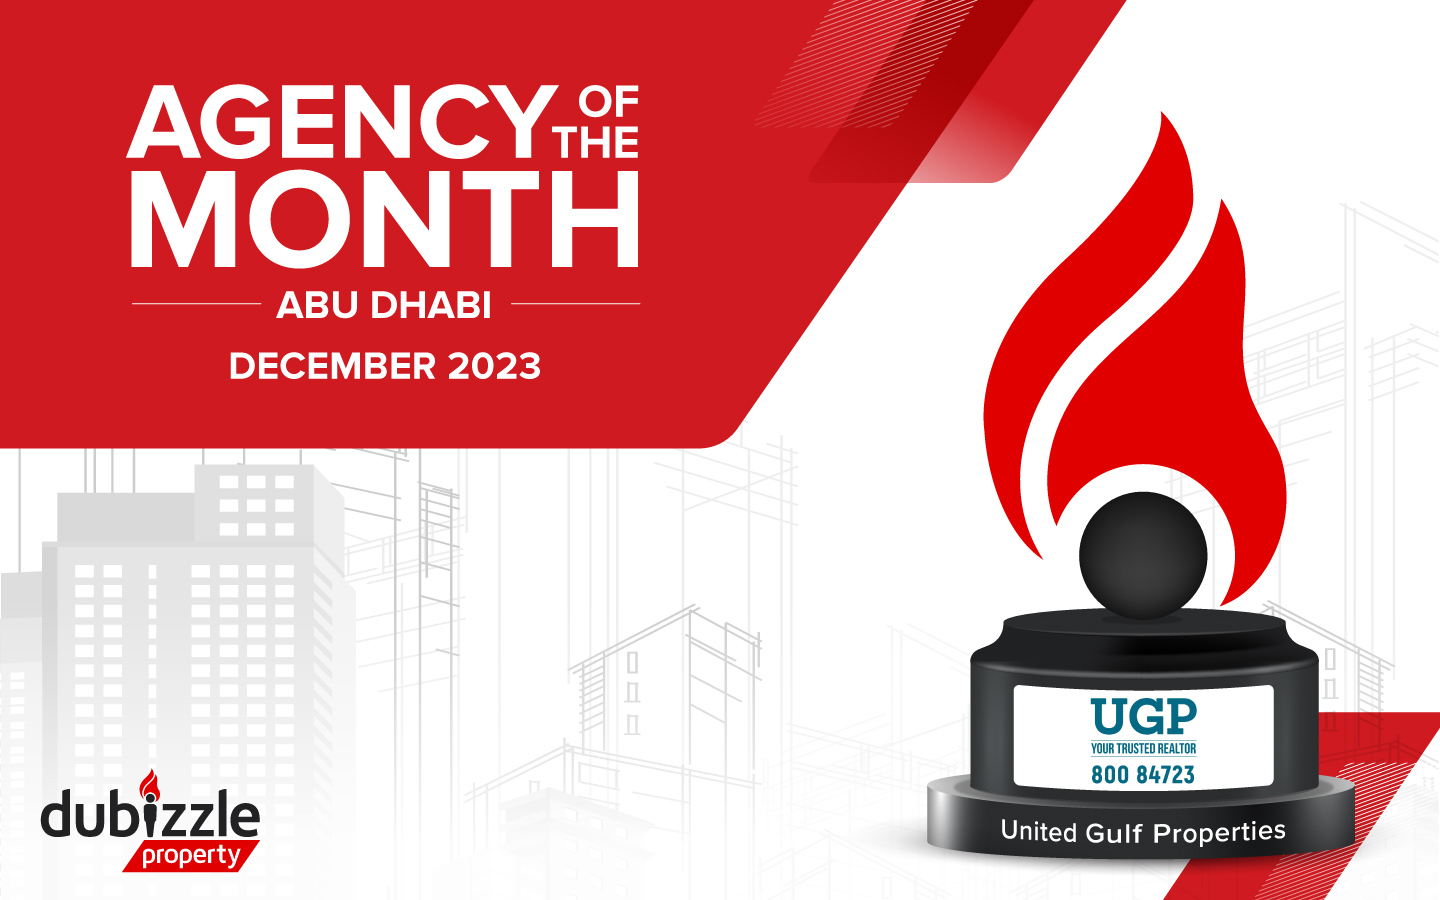 Agency of the month Abu dhabi December 2023